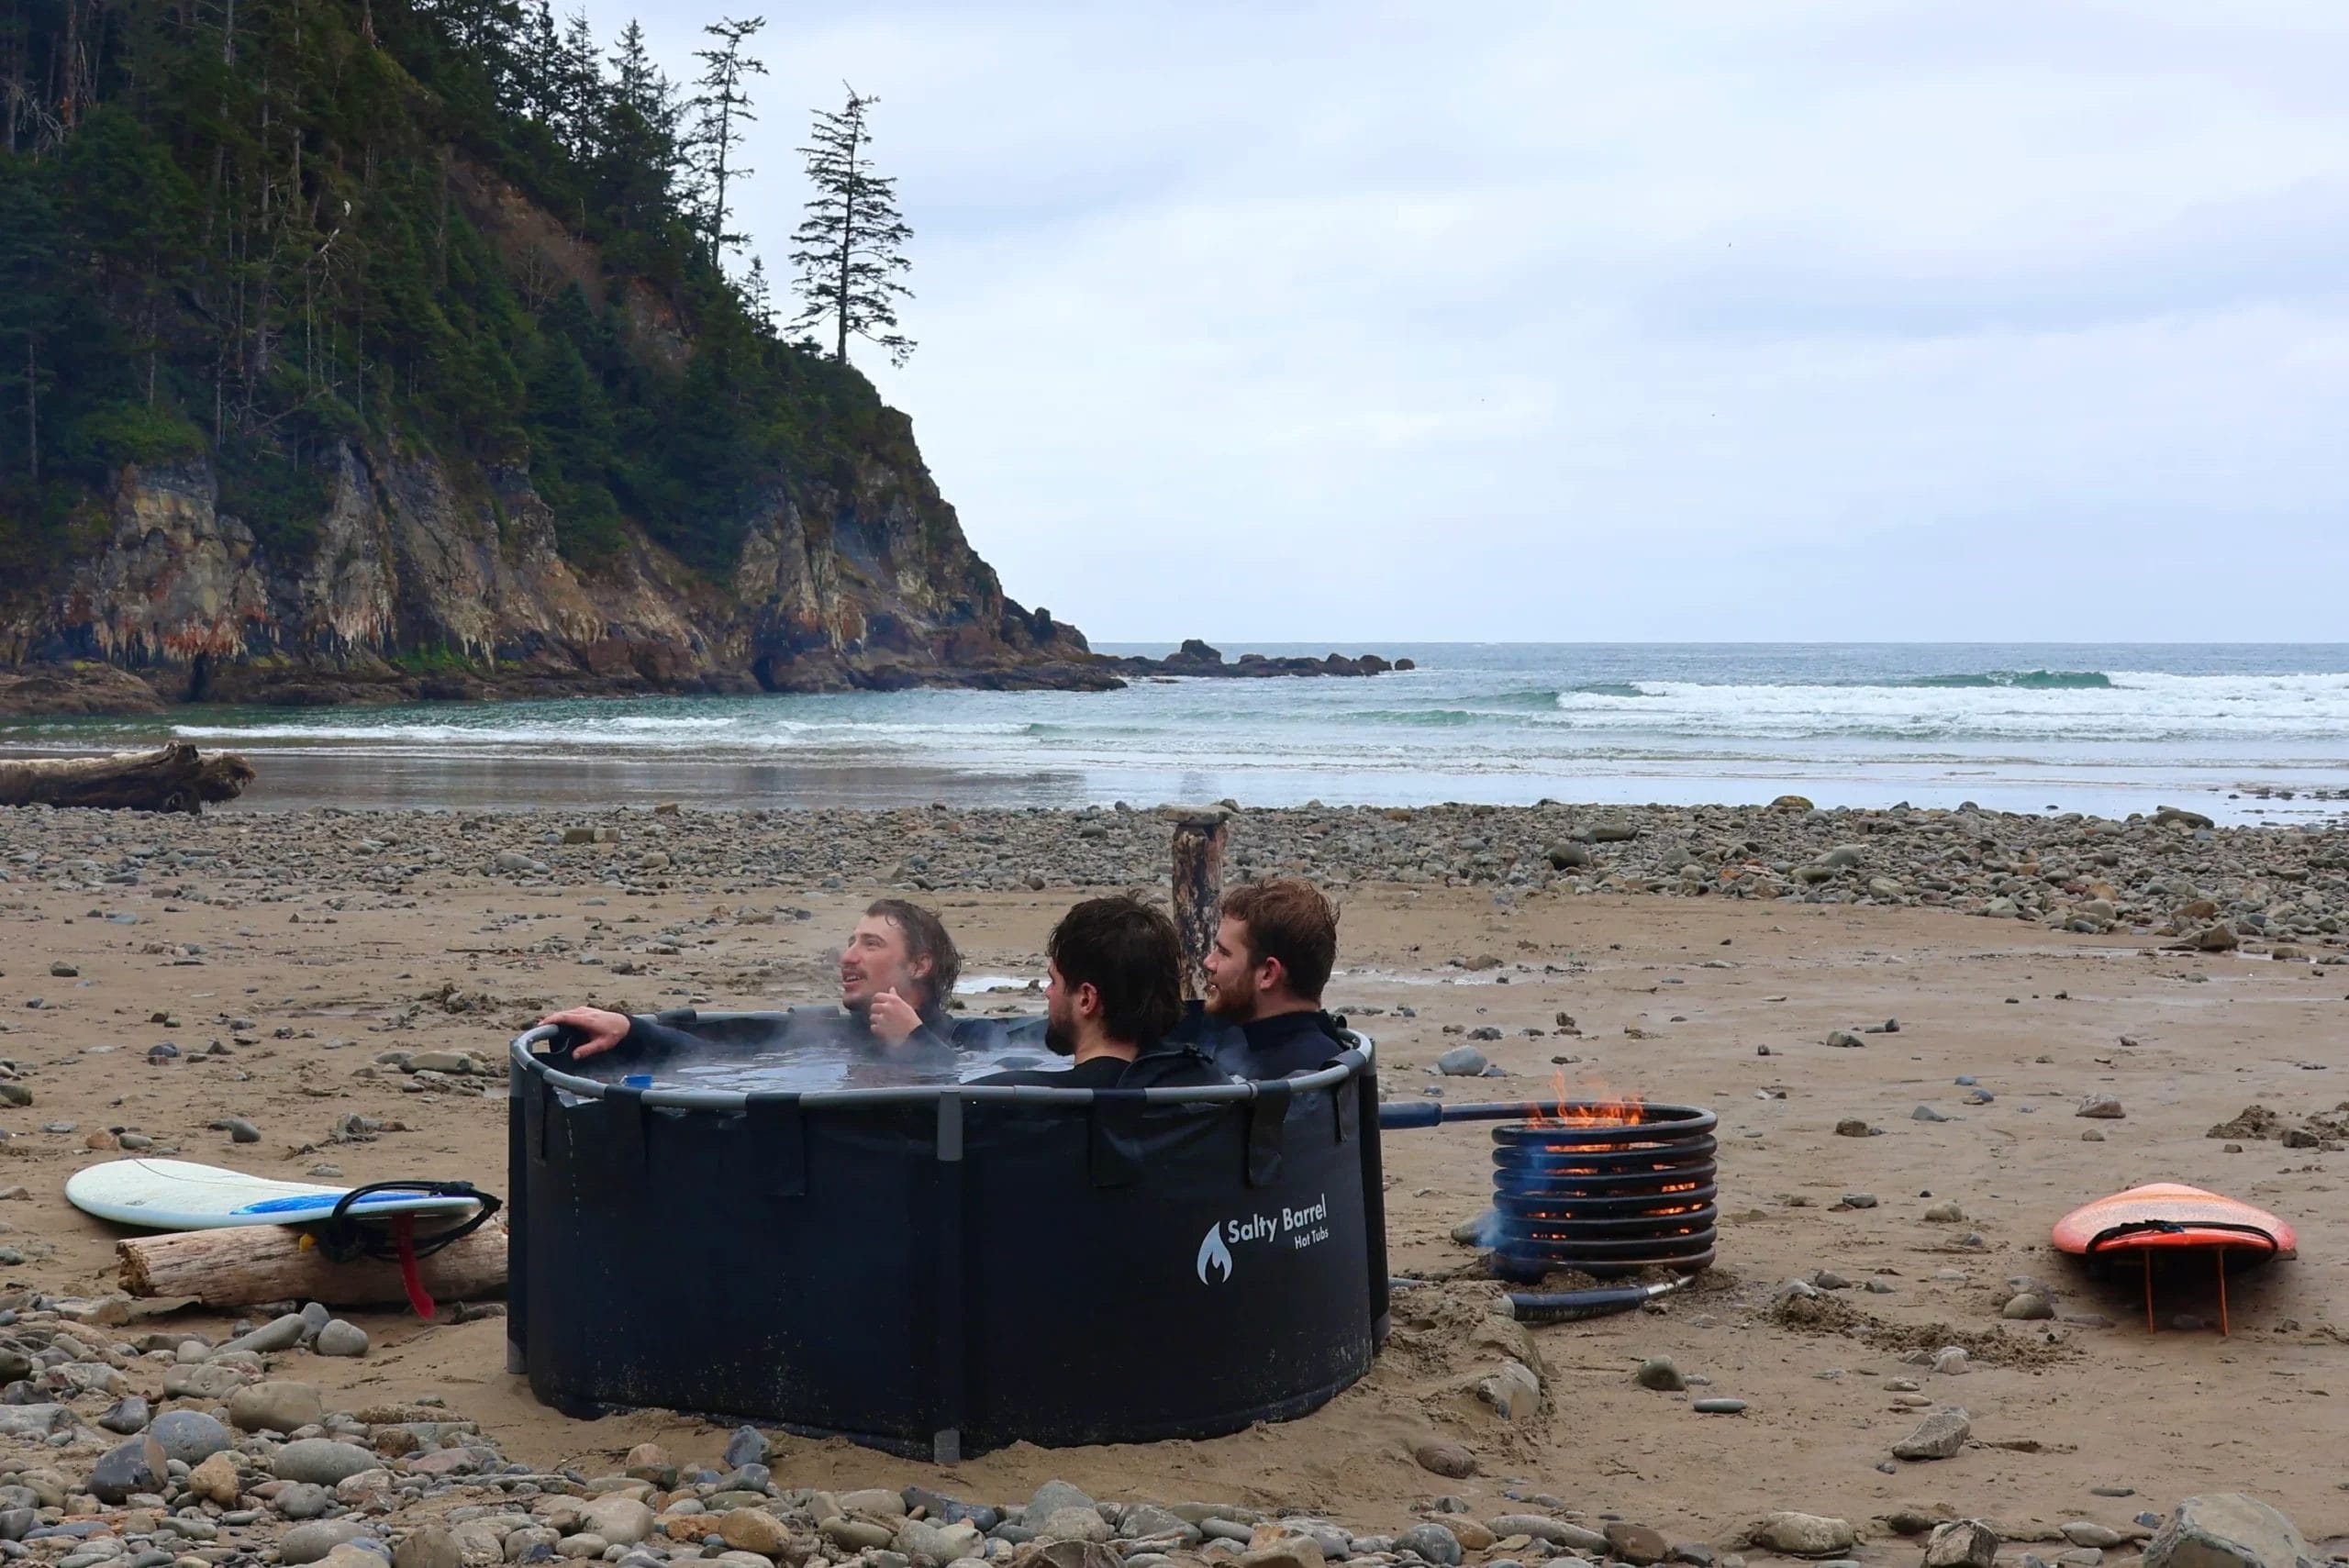 A Portable Wood Fired Hot Tub For The Outdoors - First Look